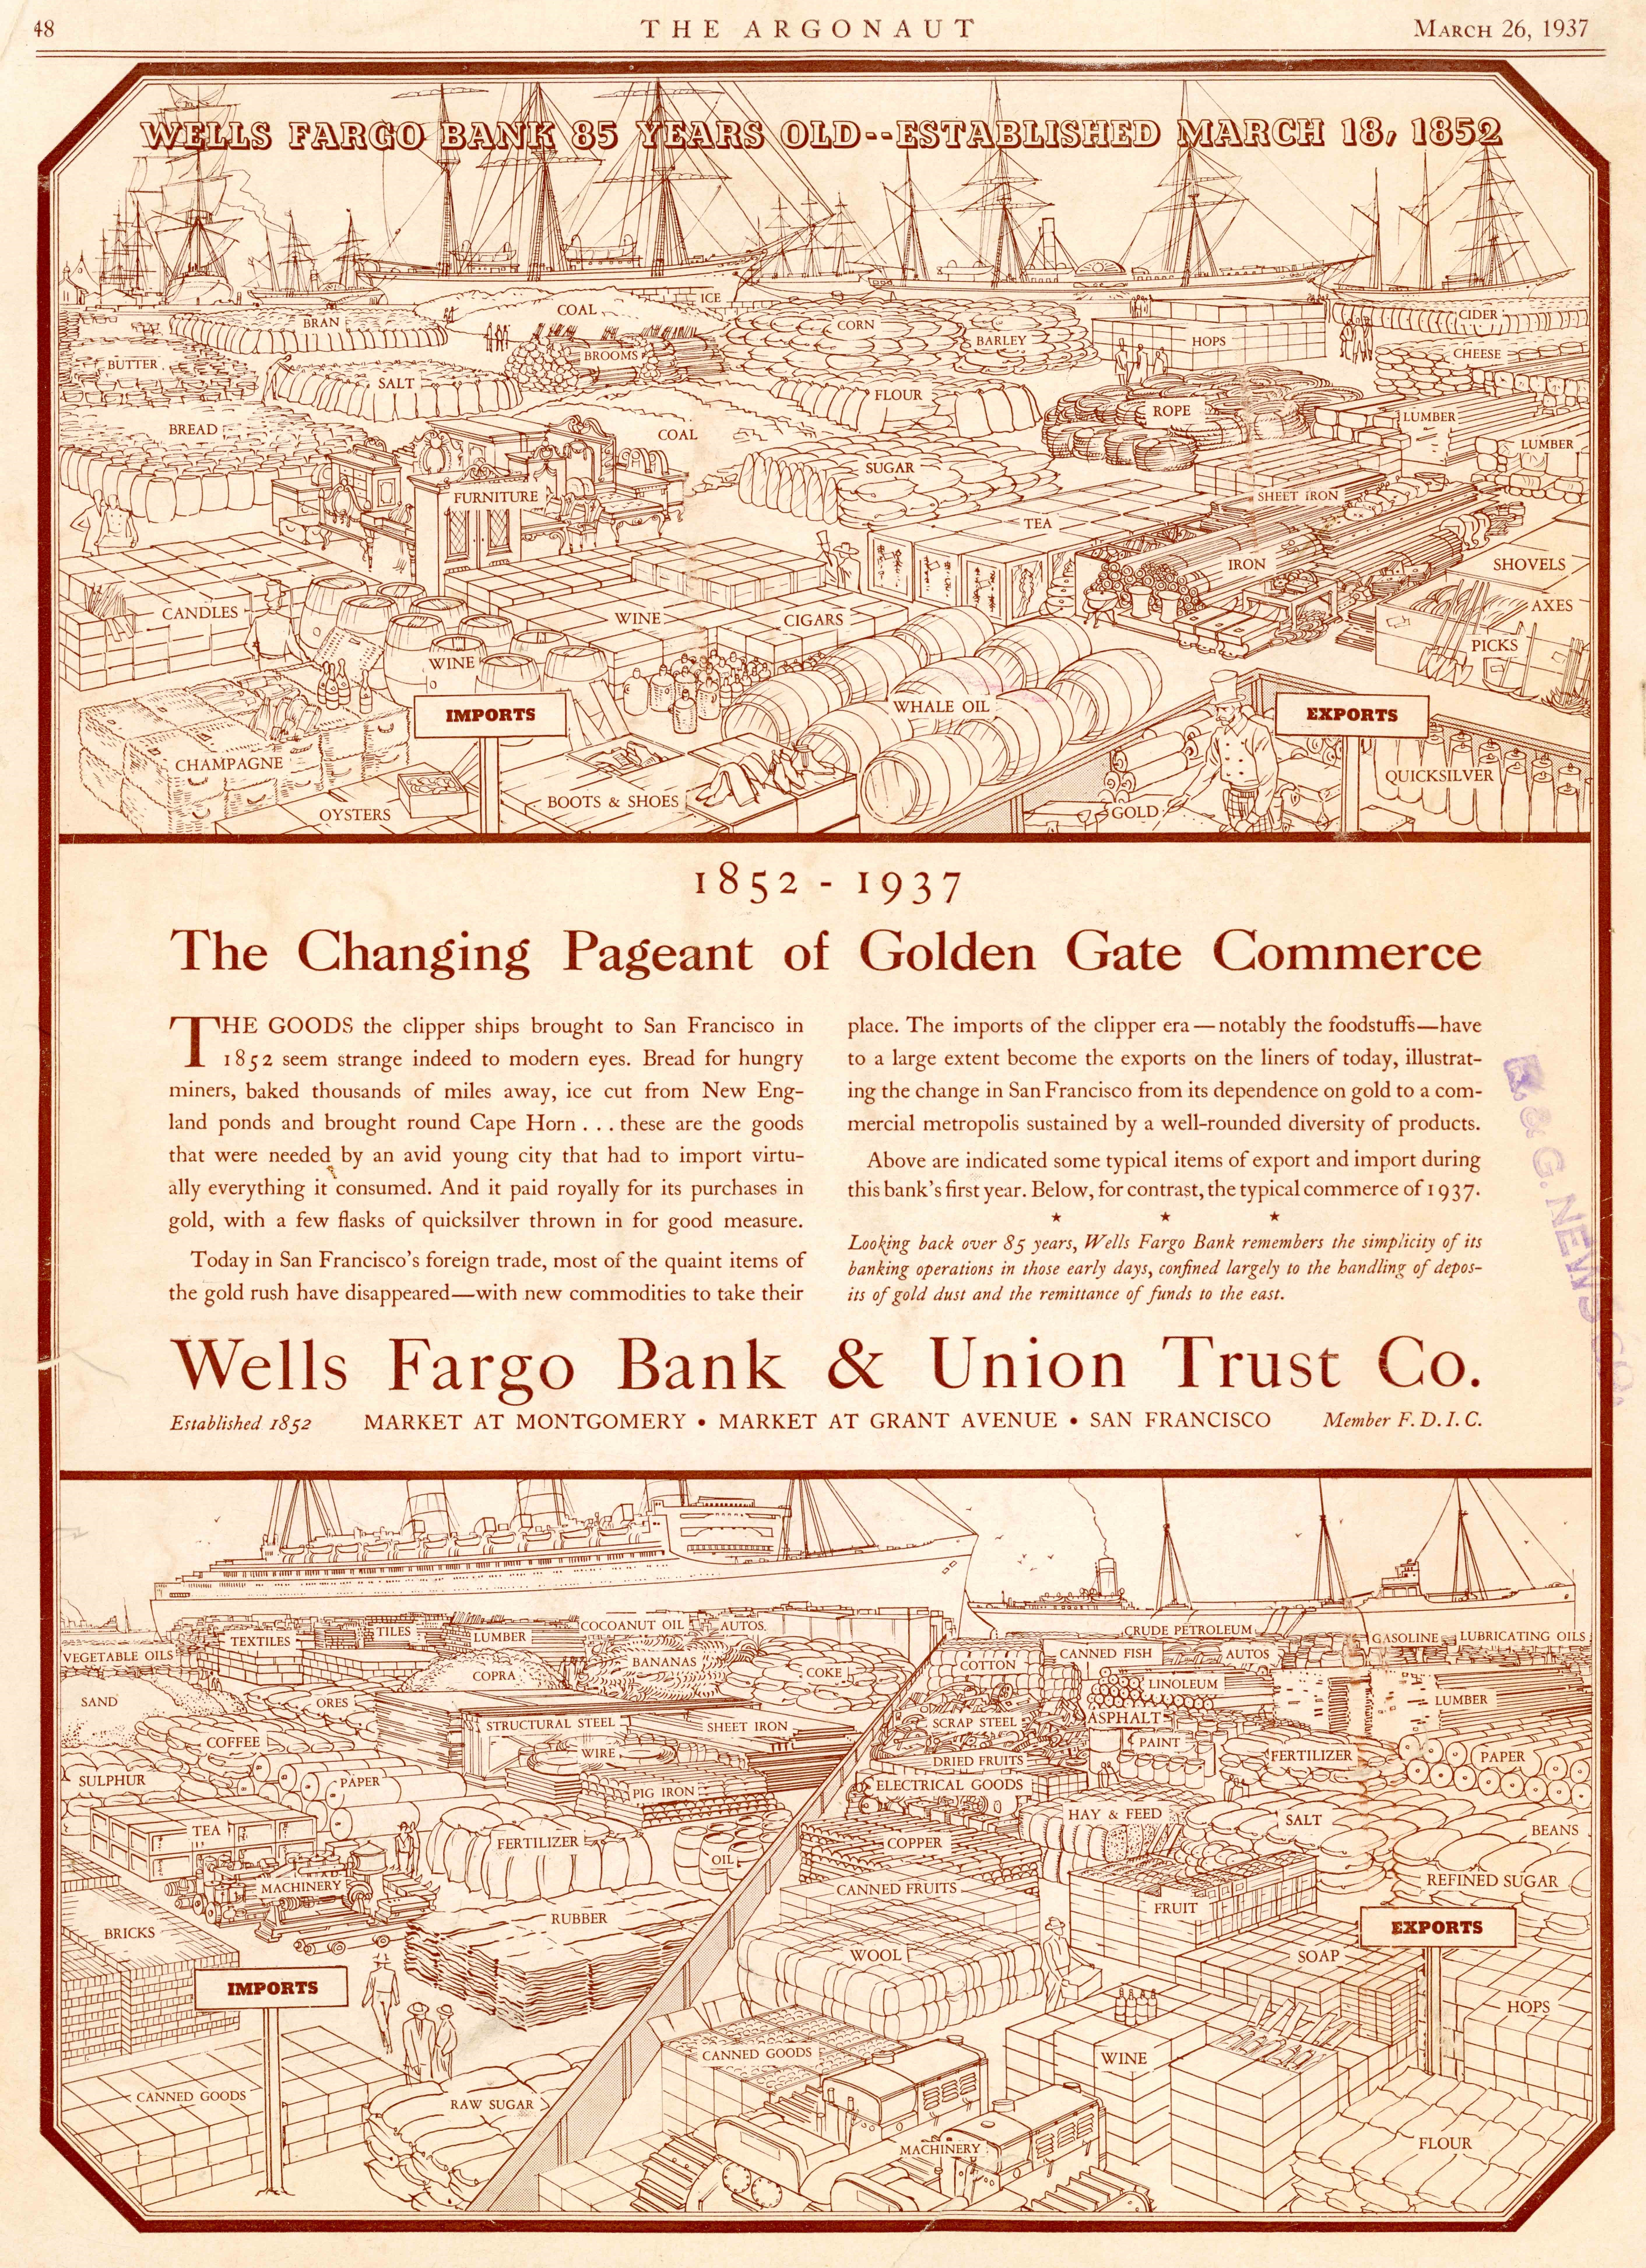 1852-1937 The Changing Pageant of Golden Gate Commerce